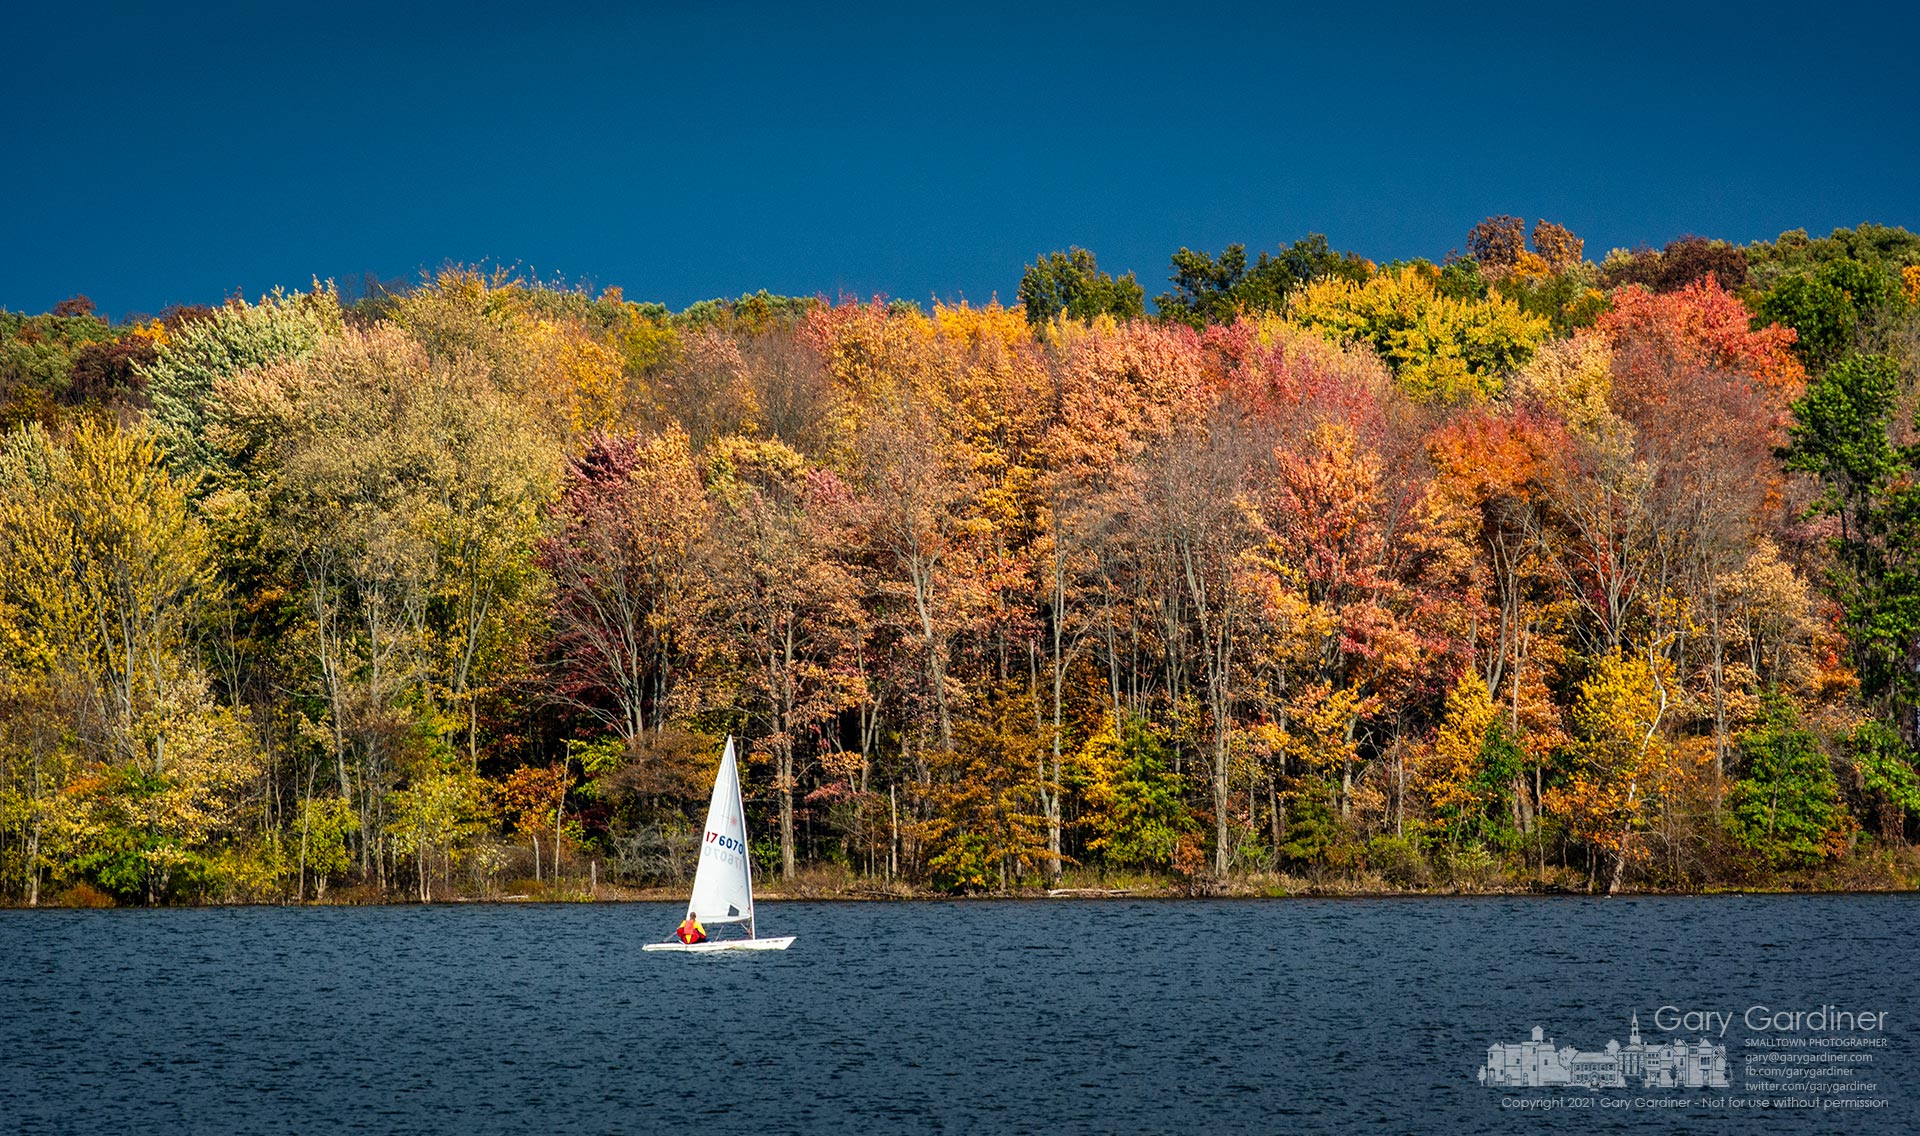 A sailor steers his single-sail craft along the gold-colored fall shoreline of Hoover Reservoir getting in a final sail for October. My Final Photo for Oct. 31, 2021.